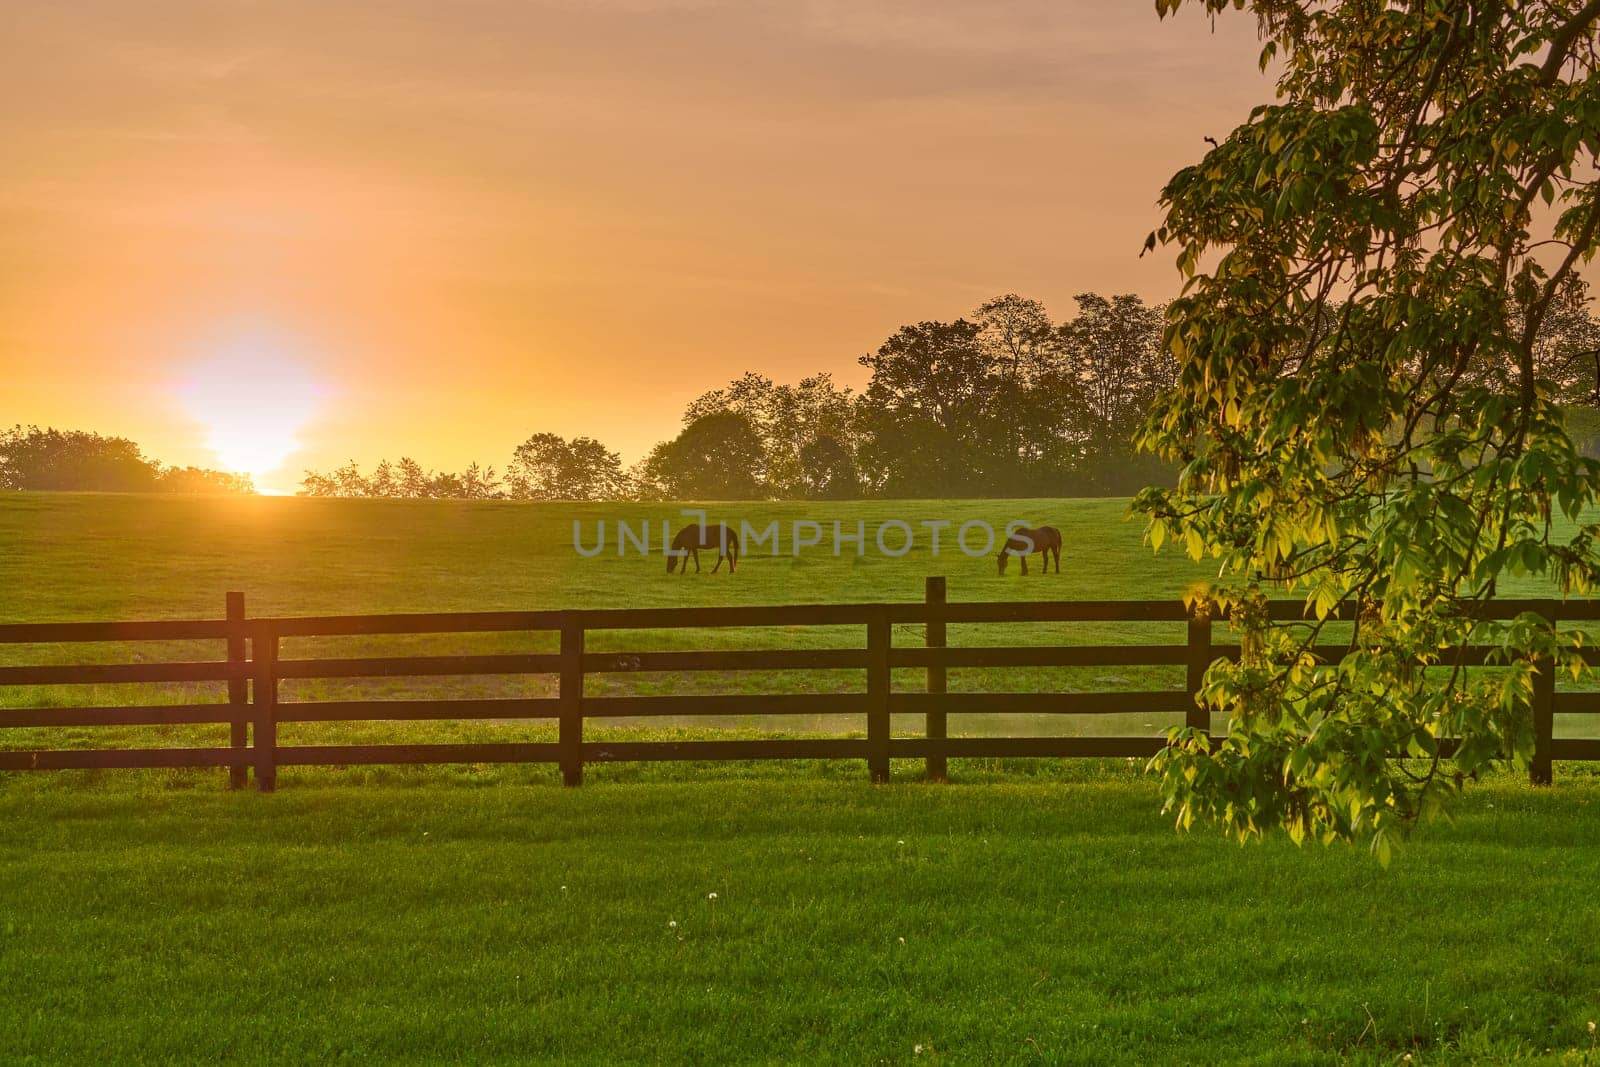 Two horse grazing in a field with rising morning sun.